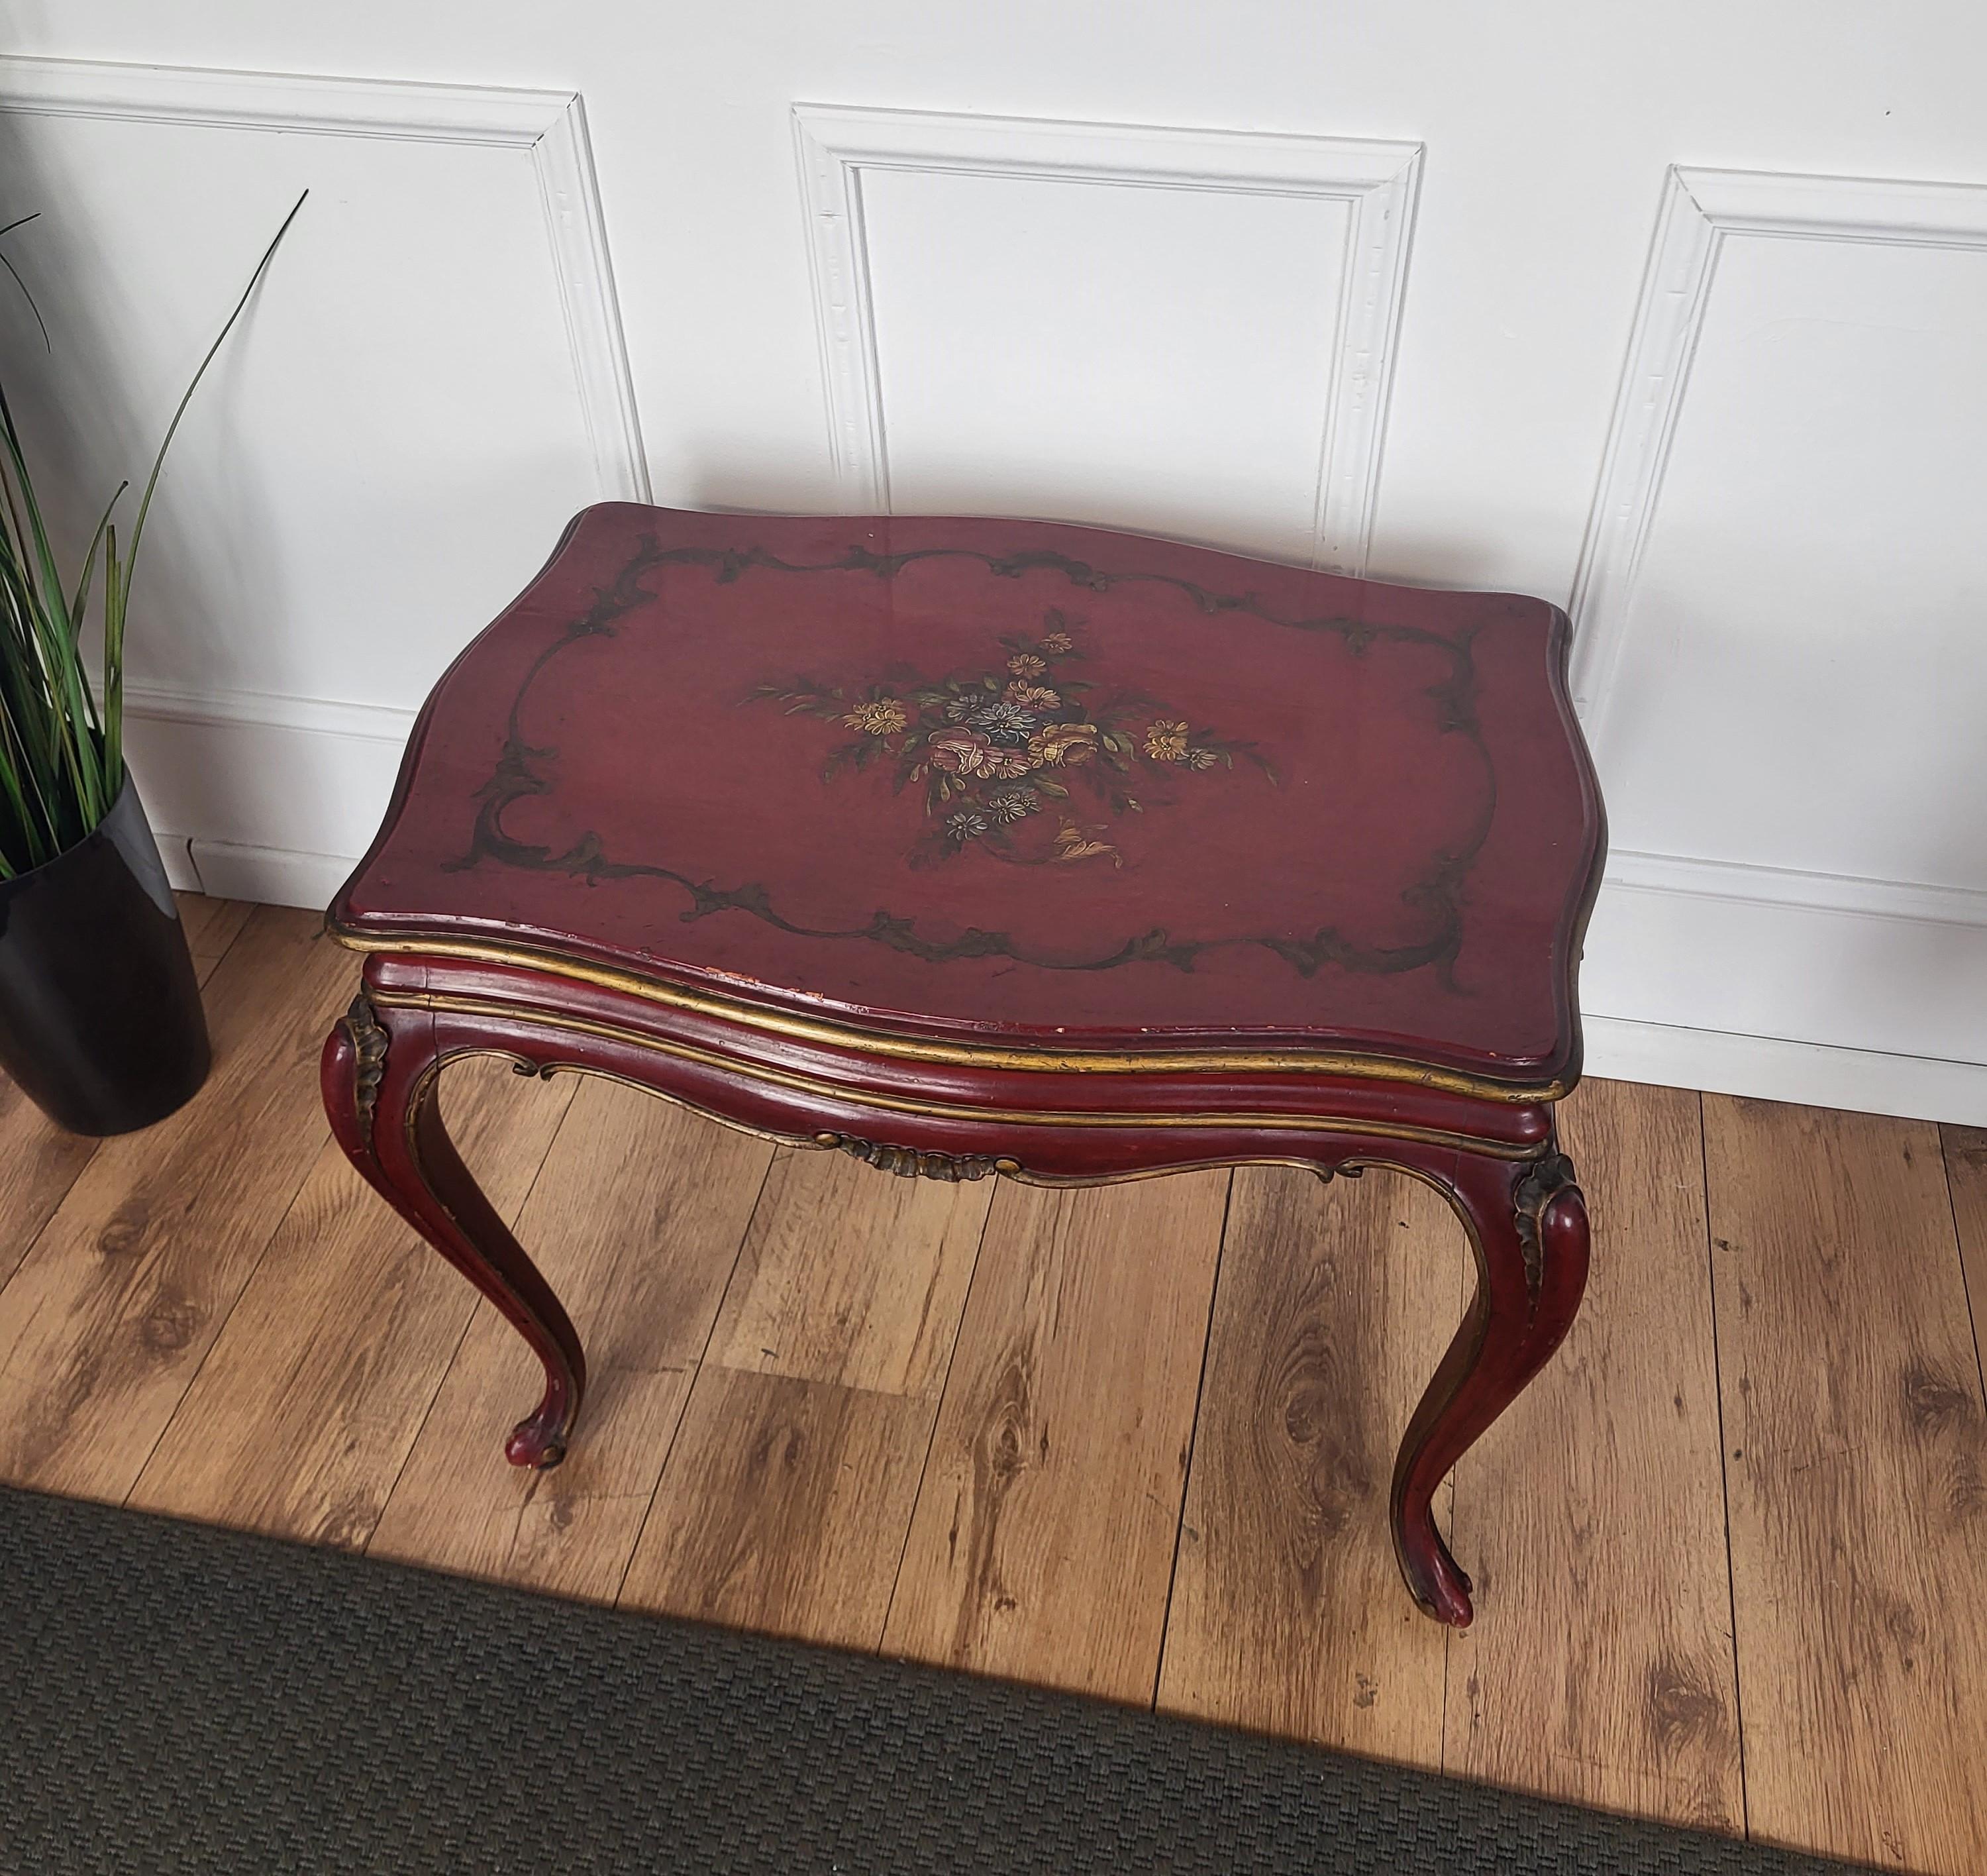 A beautiful Italian Walnut side table with great details and red bordeaux painted and carved shaped frame side with golden details. The beautiful top painted decors are classic figures in chinoiserie style. A very special, elegant, modern and